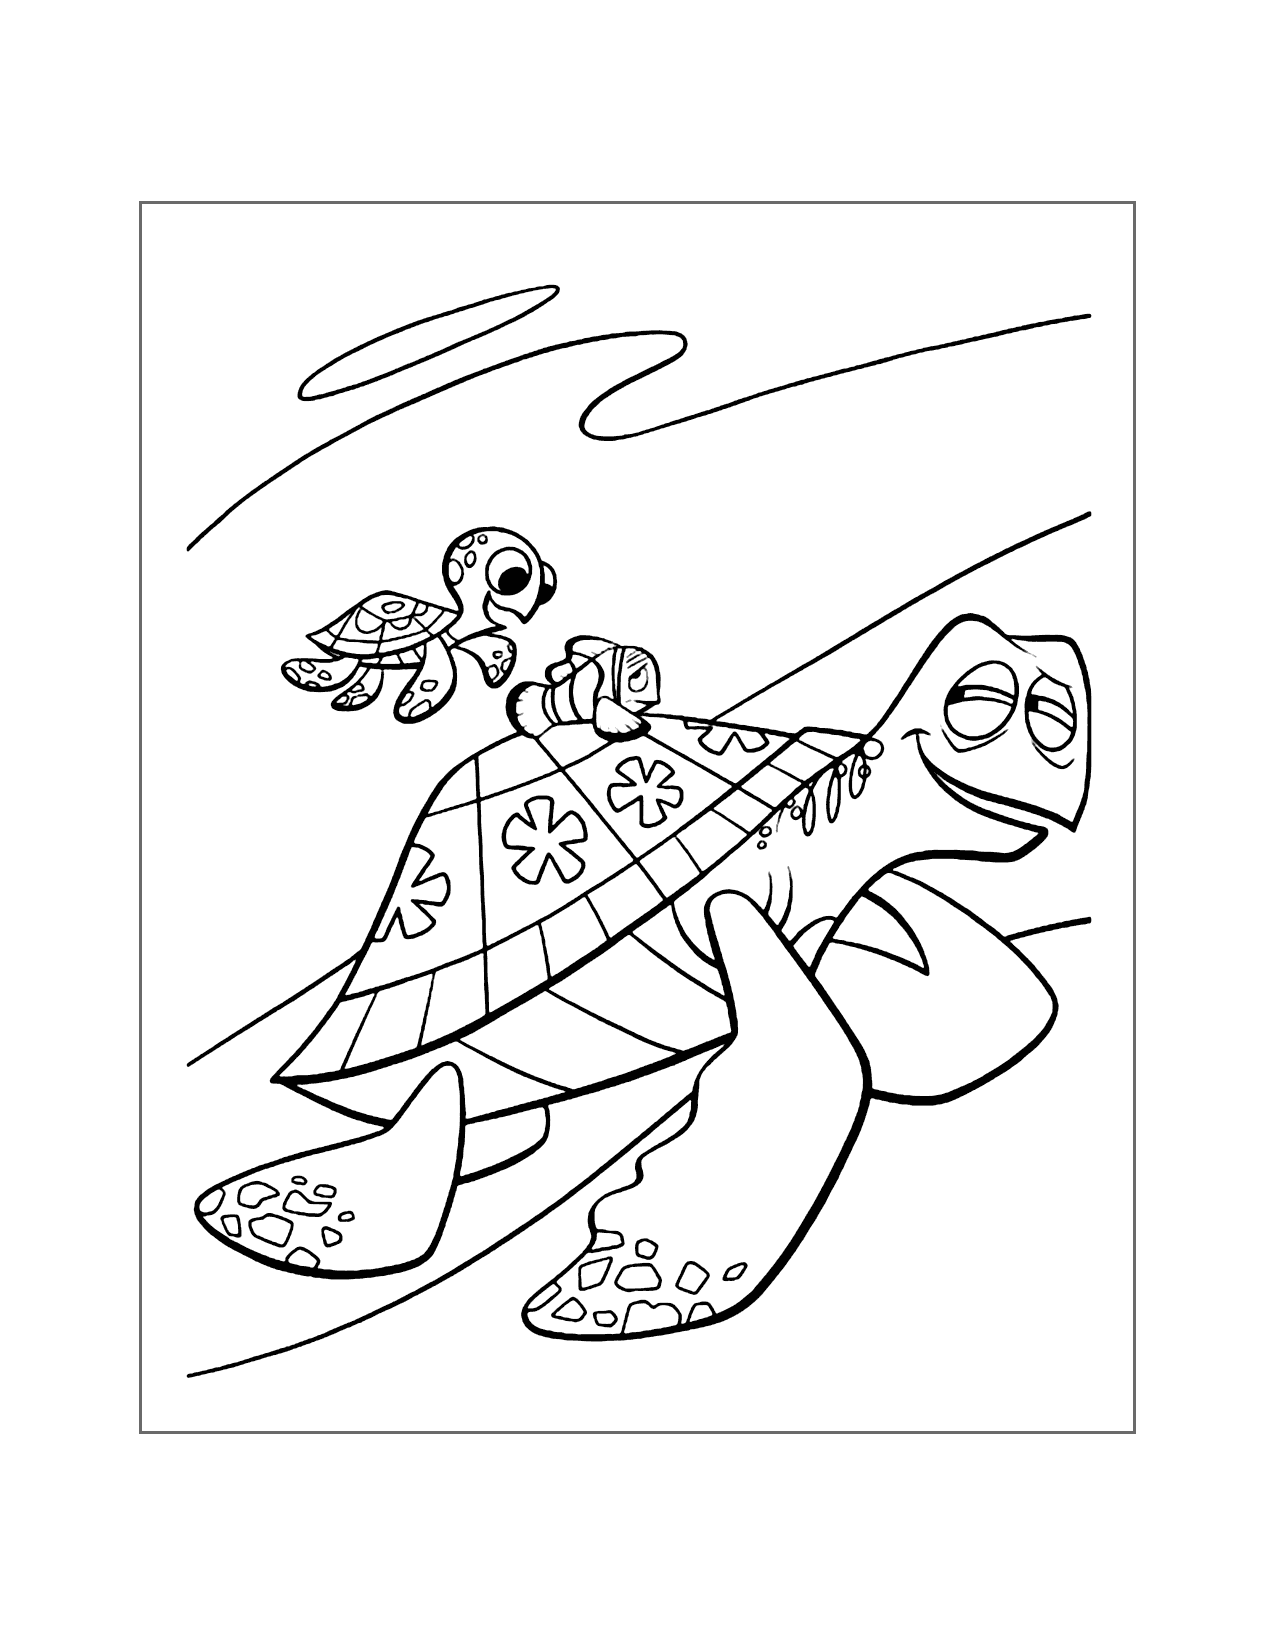 Turtles From Finding Nemo Coloring Page